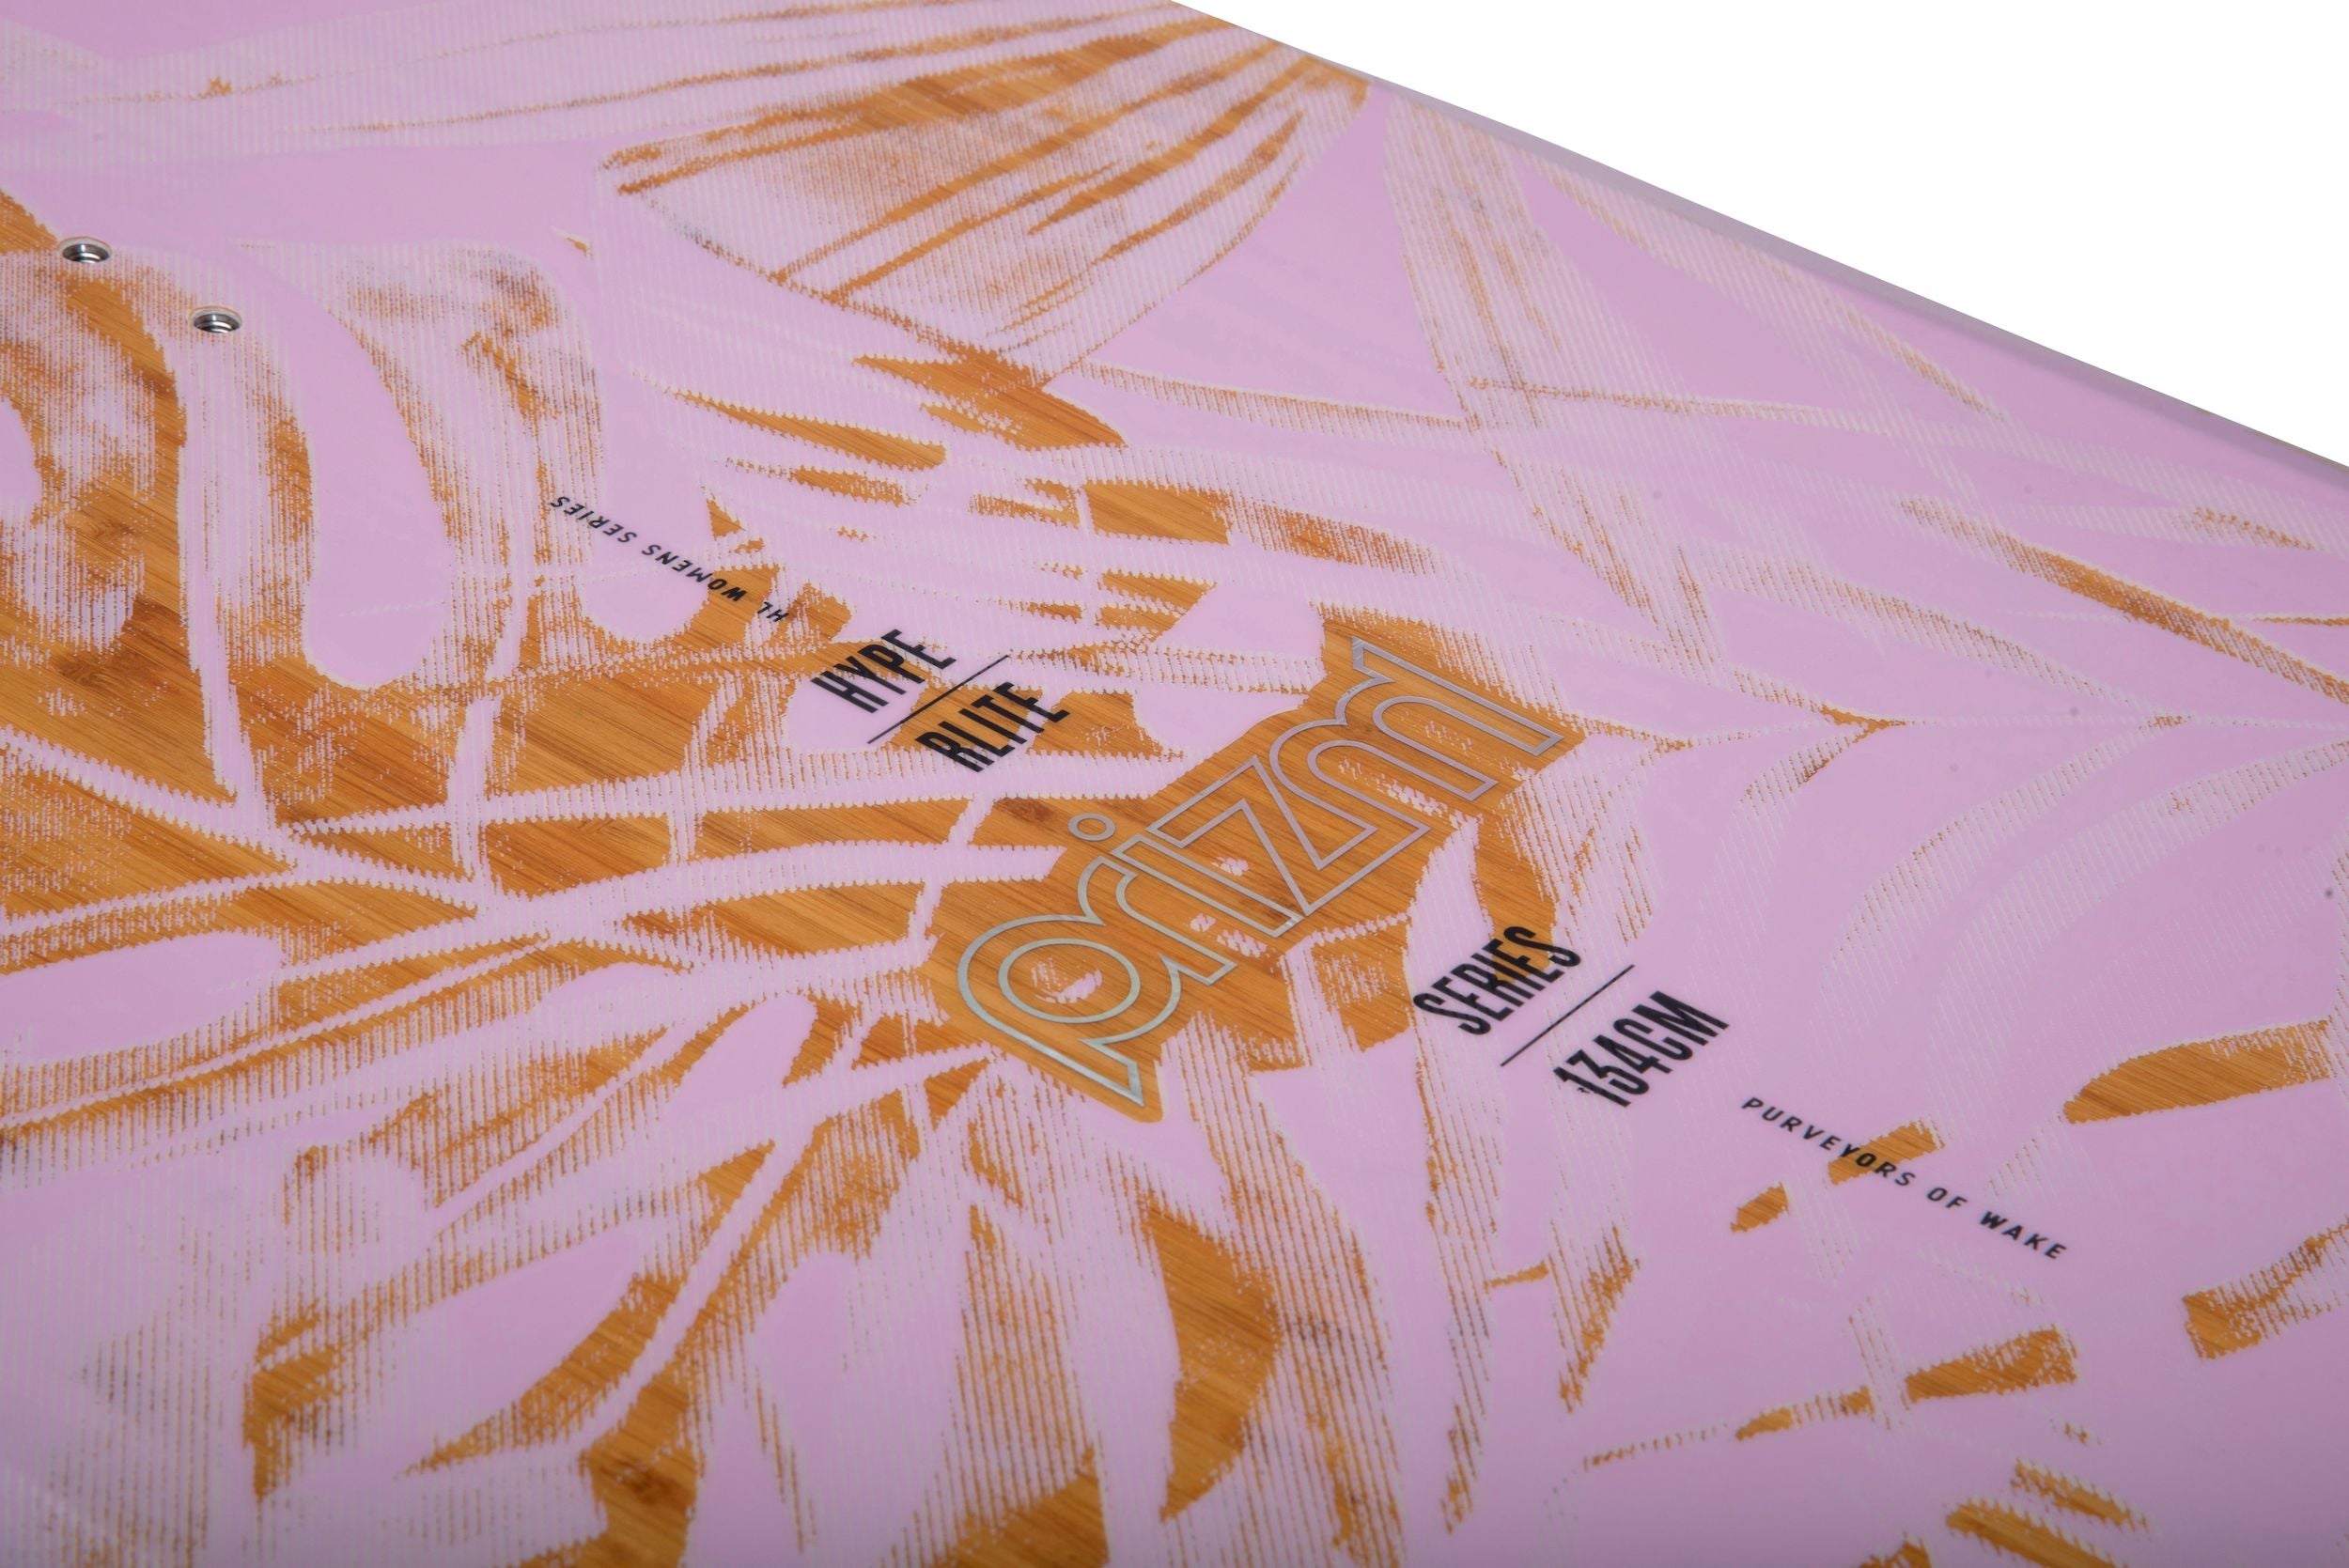 A Hyperlite 2023 Prizm Wakeboard inspired by Shaun Murray with palm leaves on it for ladies.